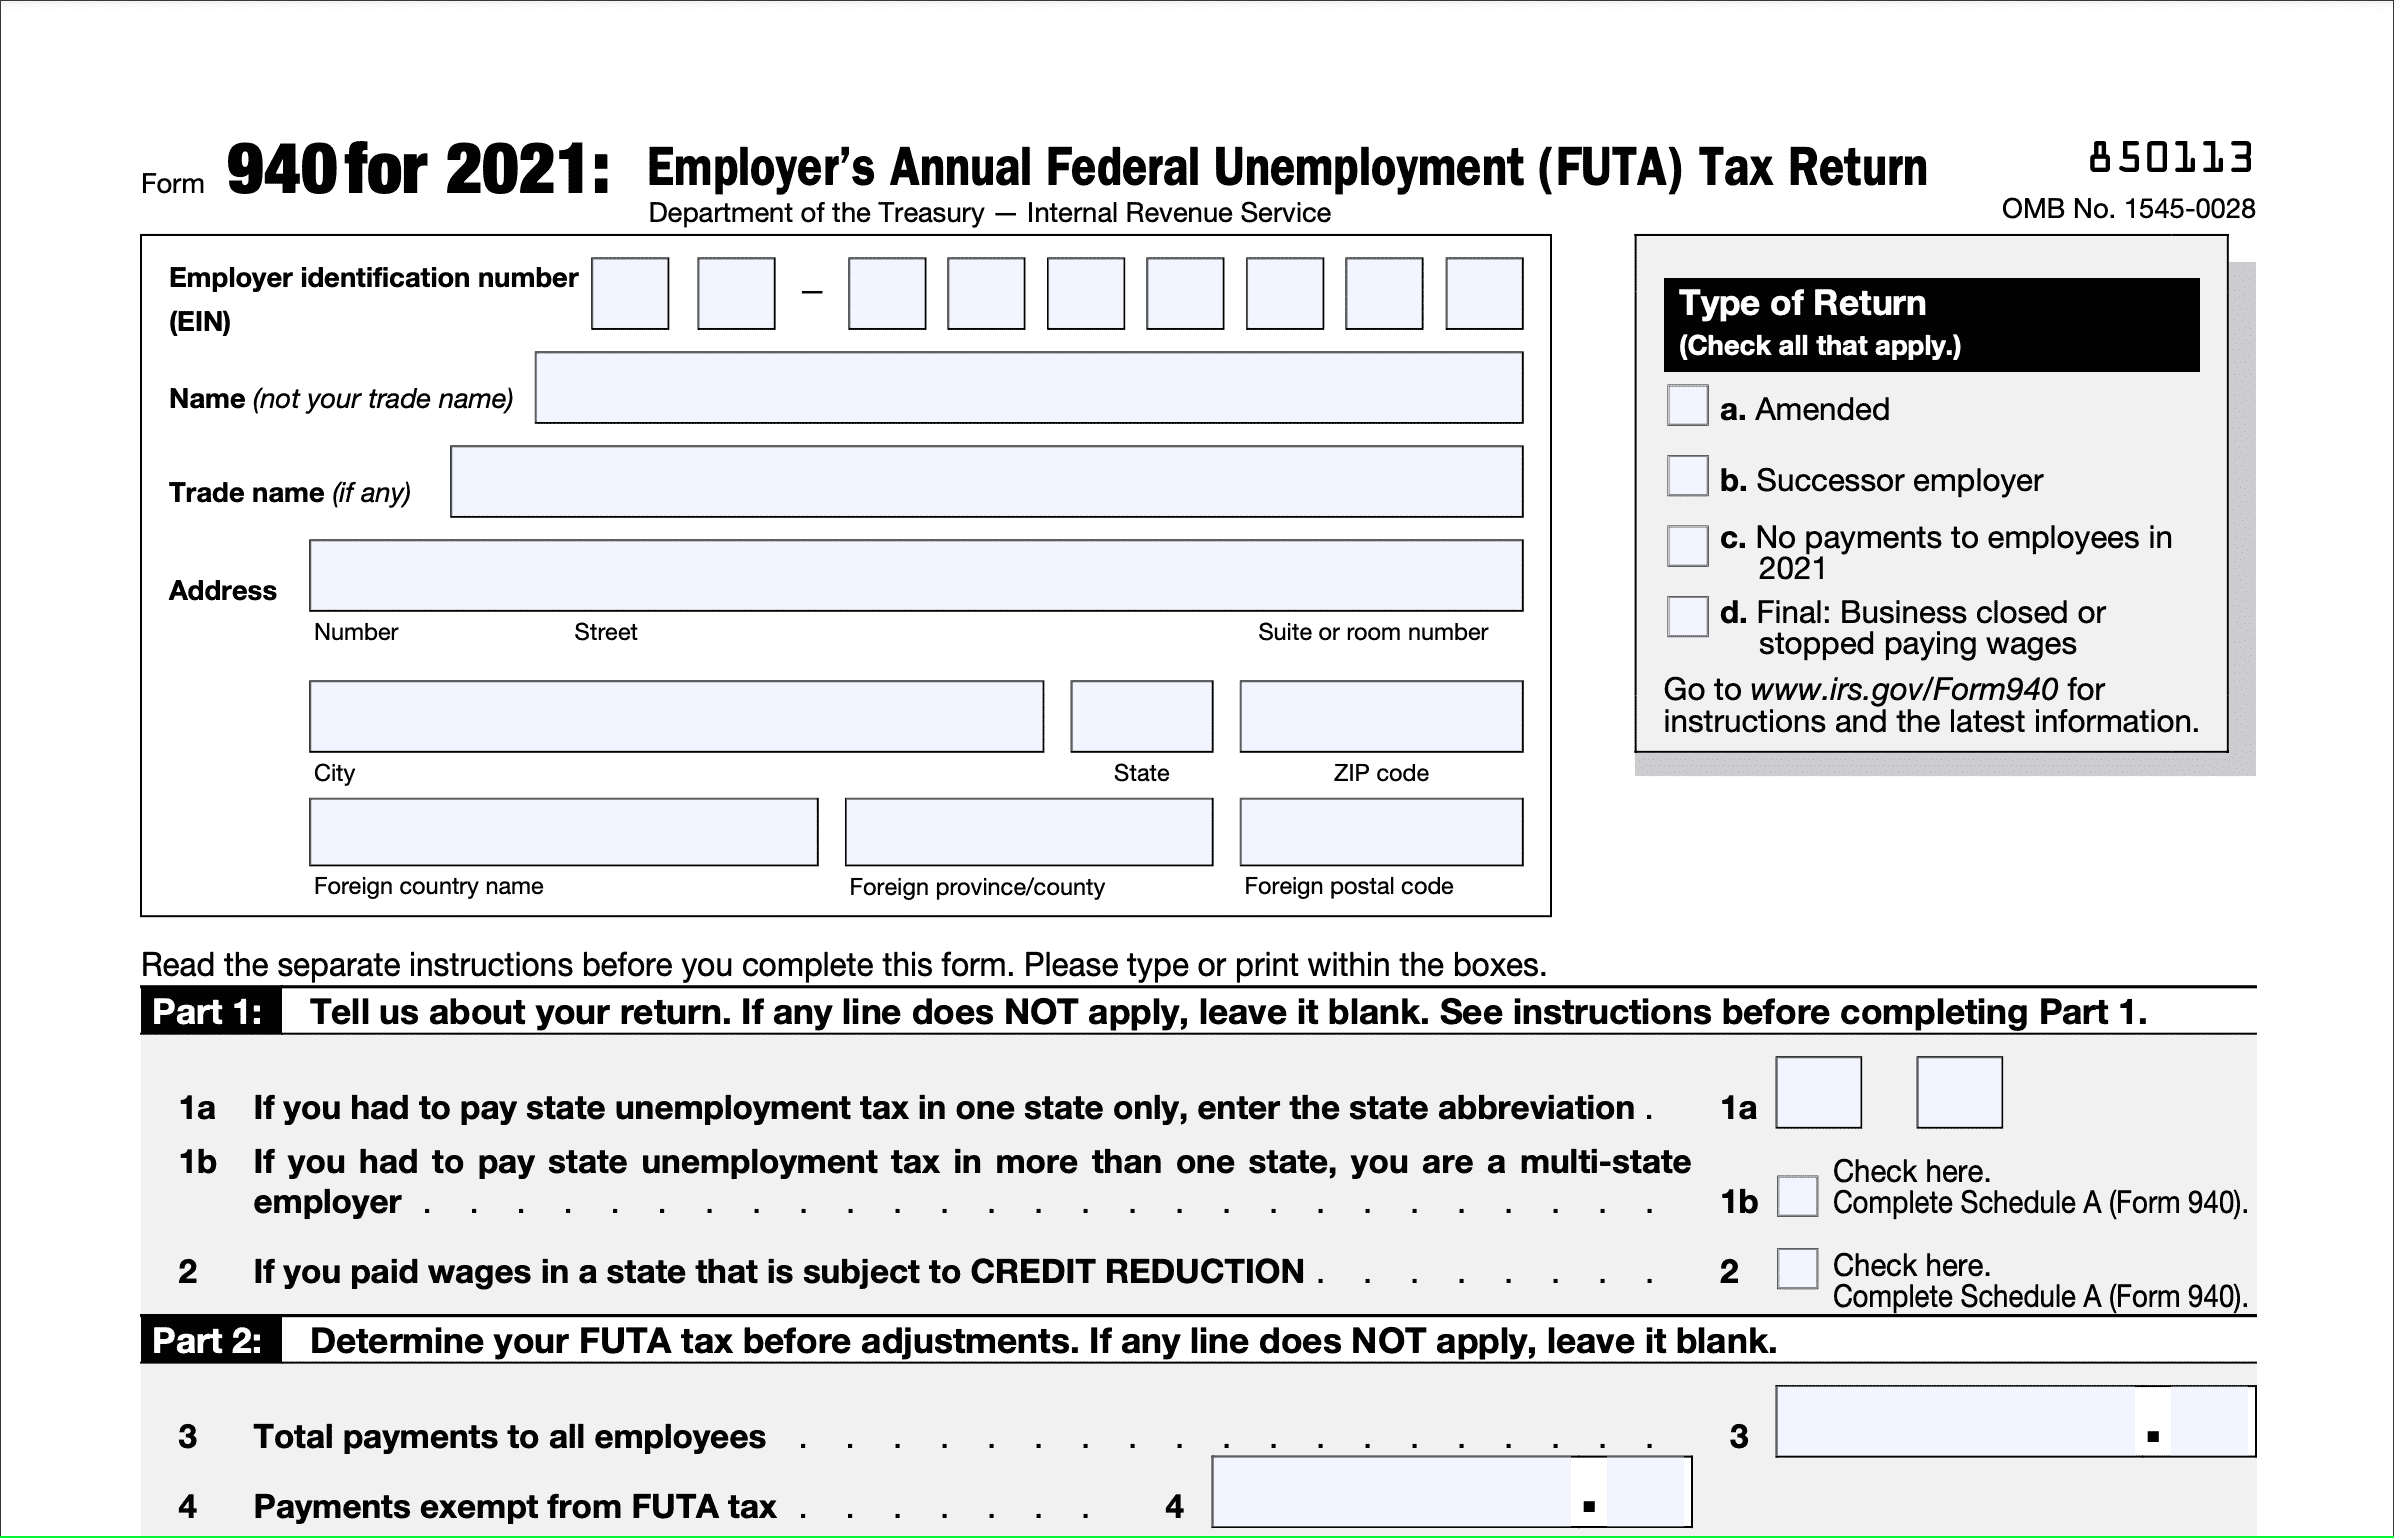 Image of Form 940 for 2021 - Employer's Annual Federal Unemployment (FUTA) Tax Return. Includes employer identification number, address, and tax information. No mention of self employed, 1099, freelancer, or taxes.